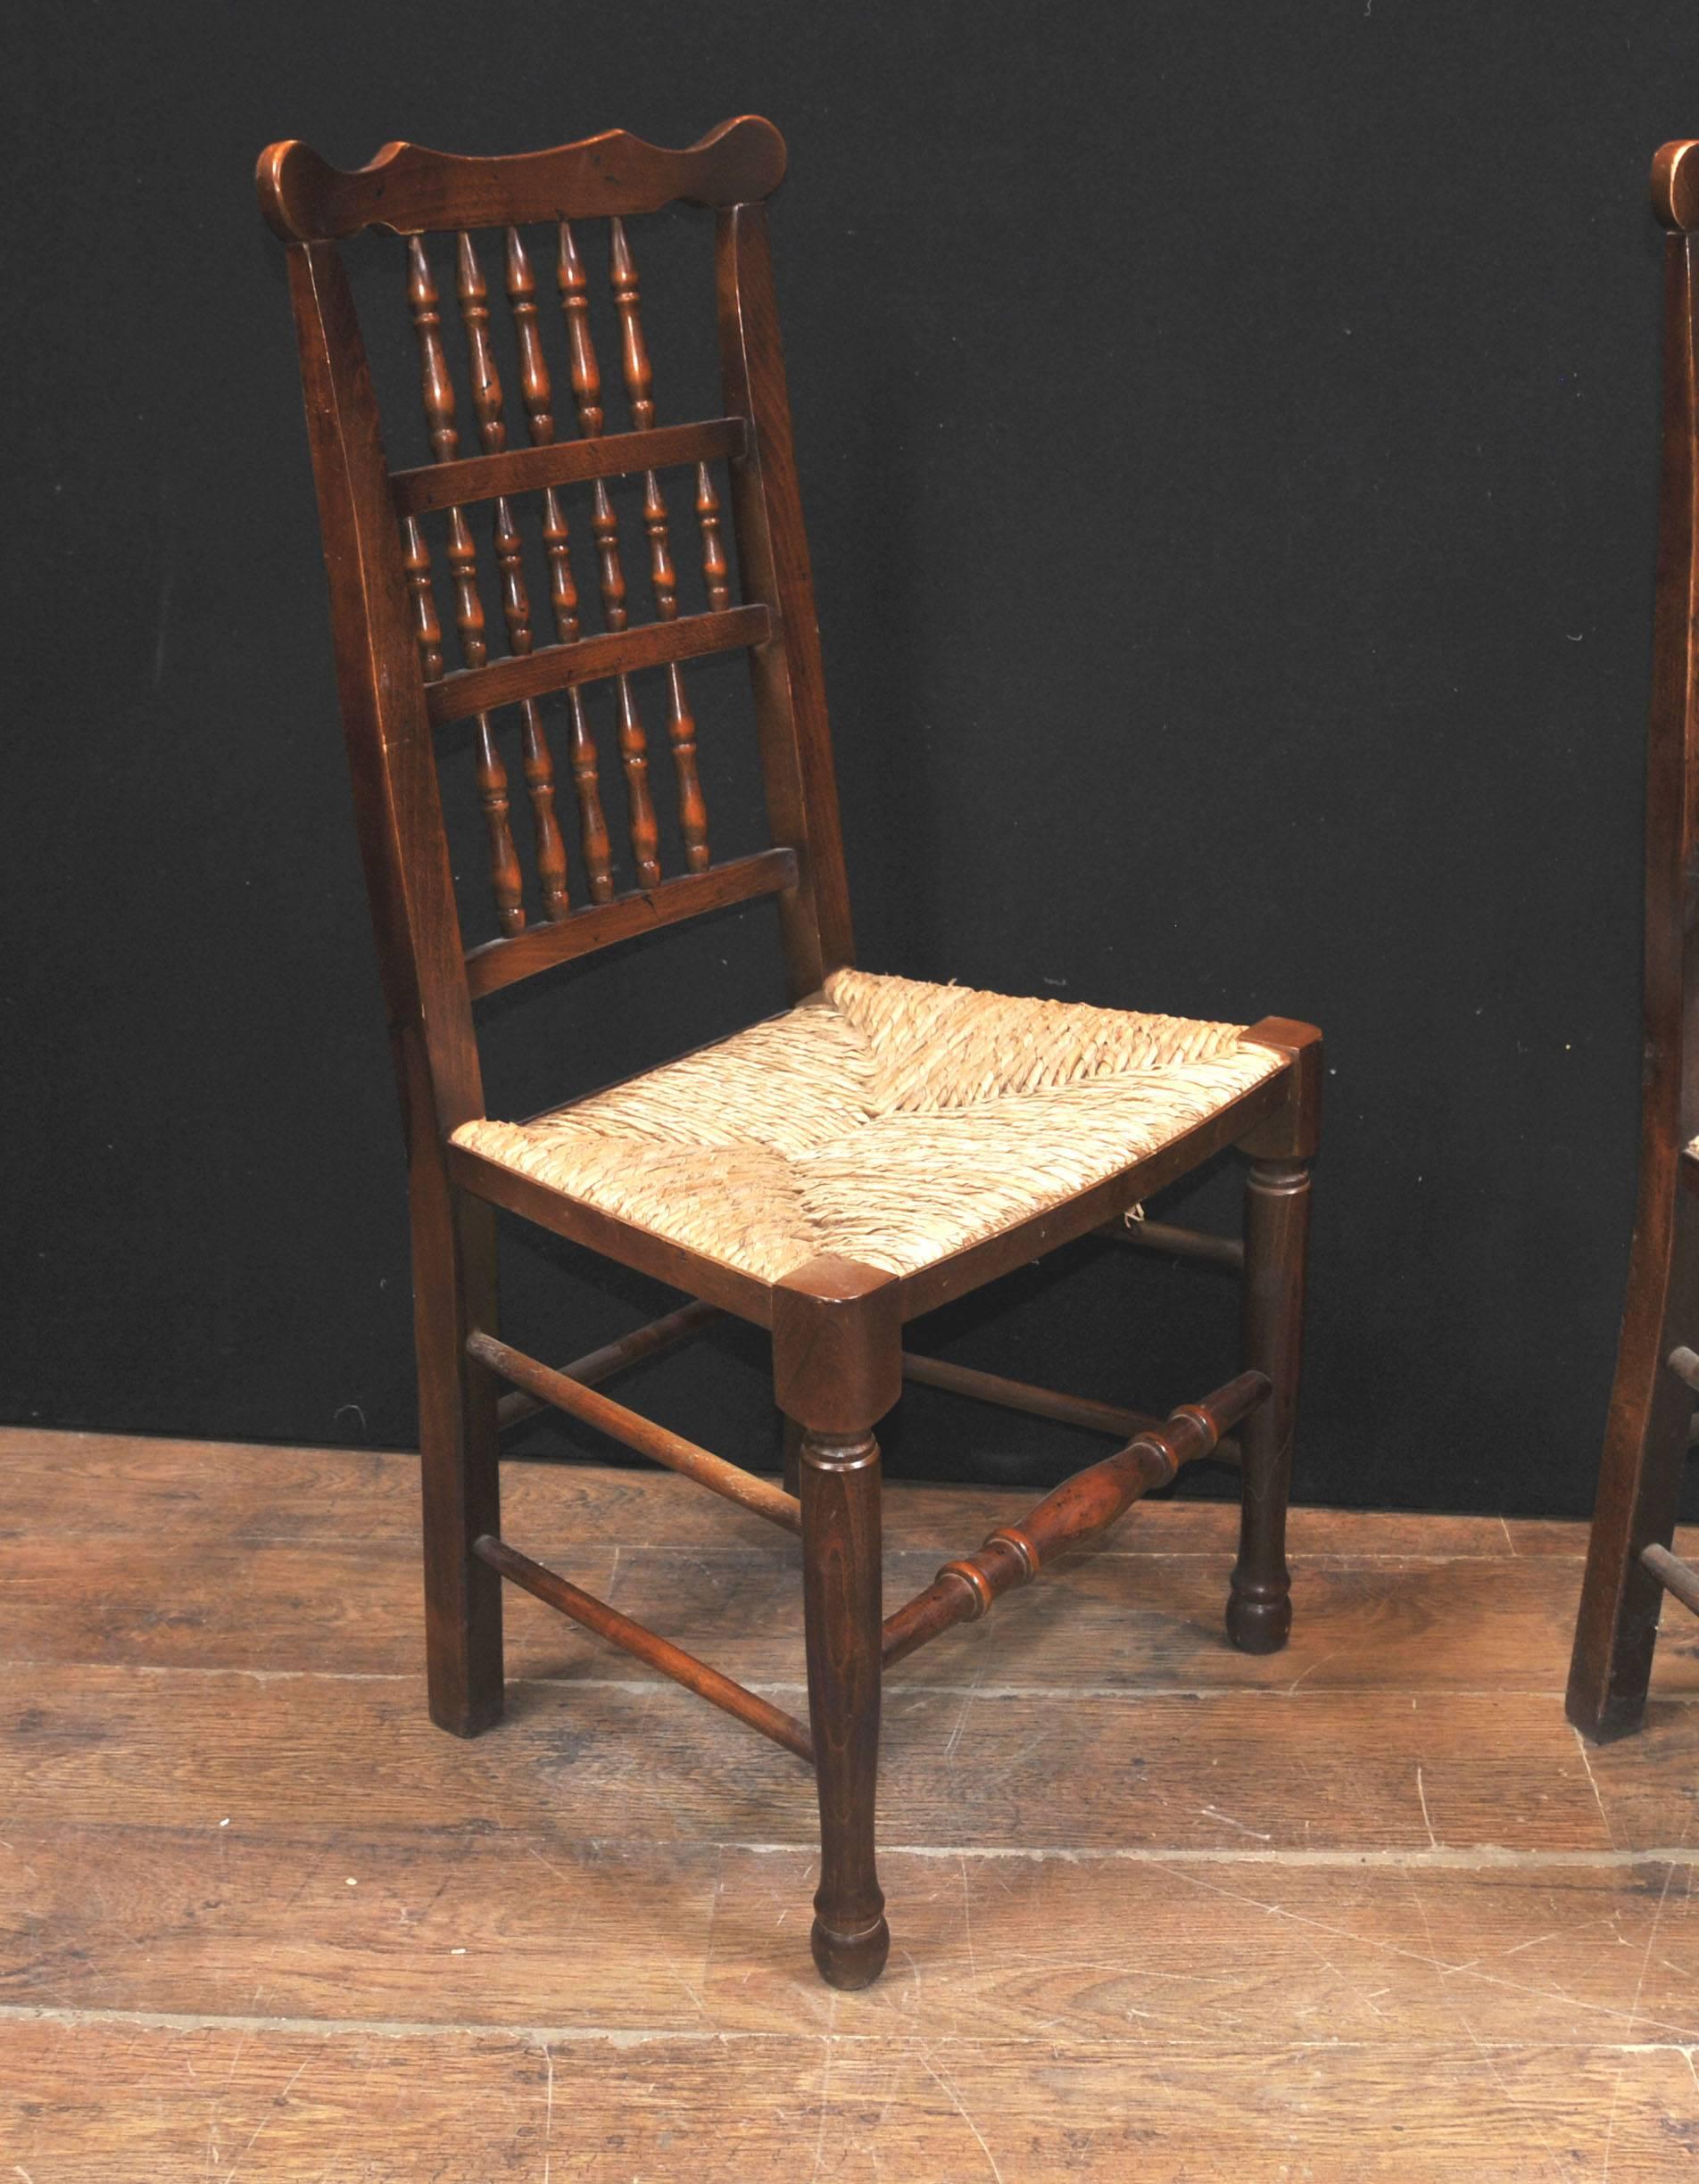 Gorgeous set of eight English oak spindle back chairs.
Set consists of two armchairs and six carvers.
Classic farmhouse kitchen look with this gorgeous set.
Handwoven rush seats, very comfortable to sit in.
Various farmhouse refectory tables to